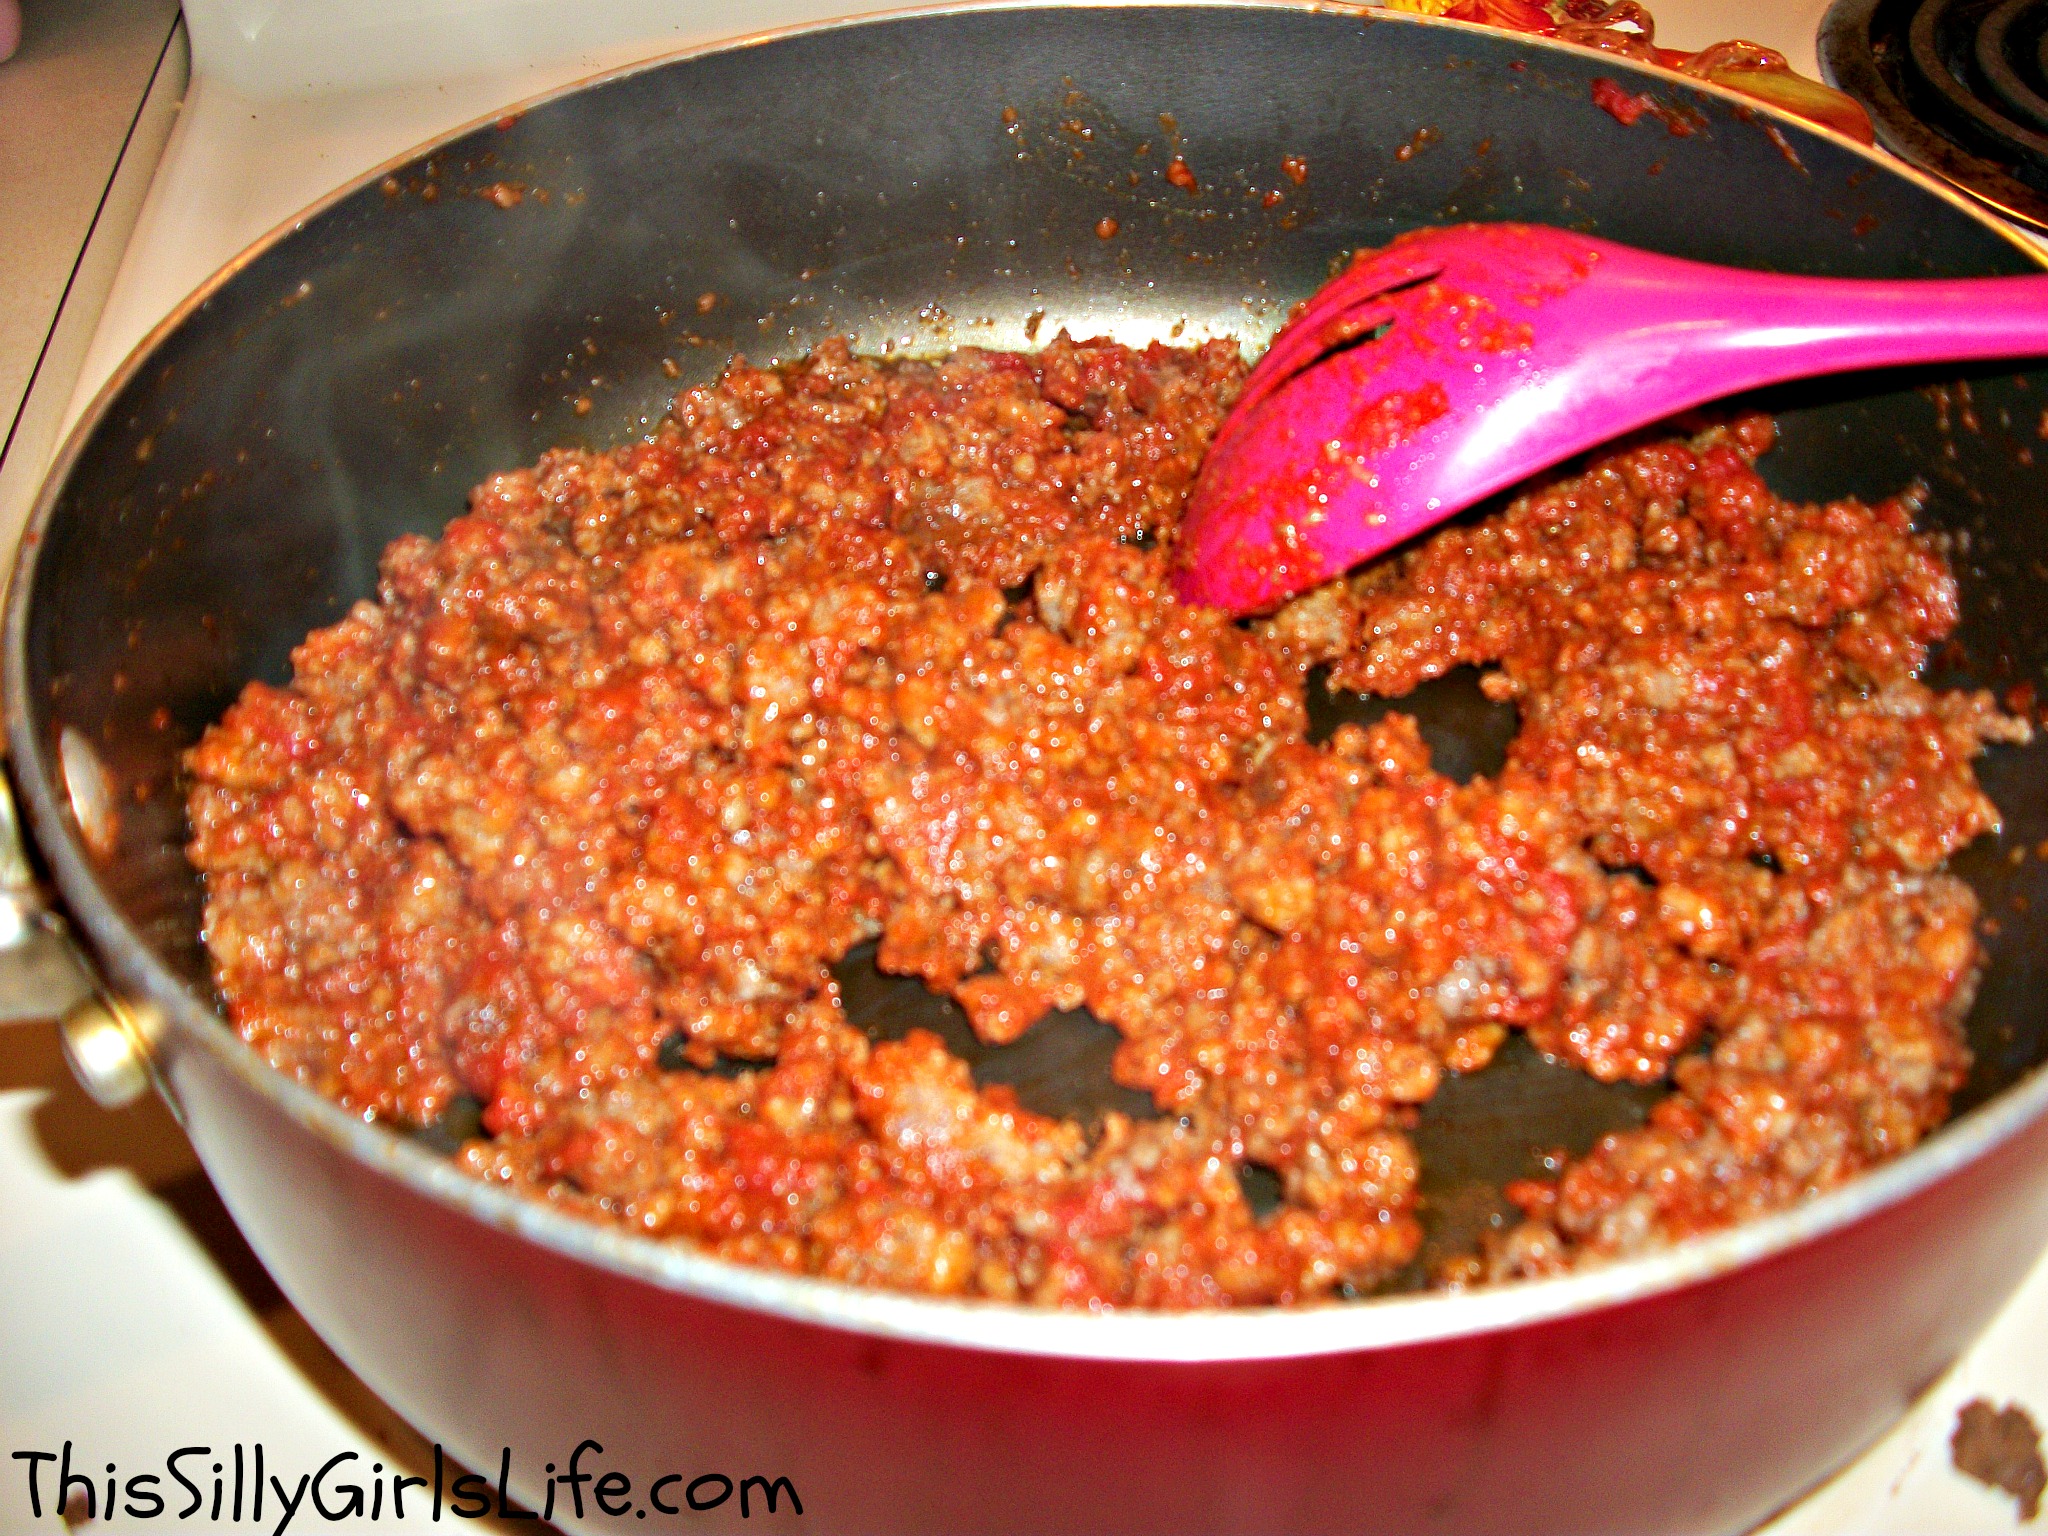 How To: Meat Sauce - This Silly Girl's Kitchen